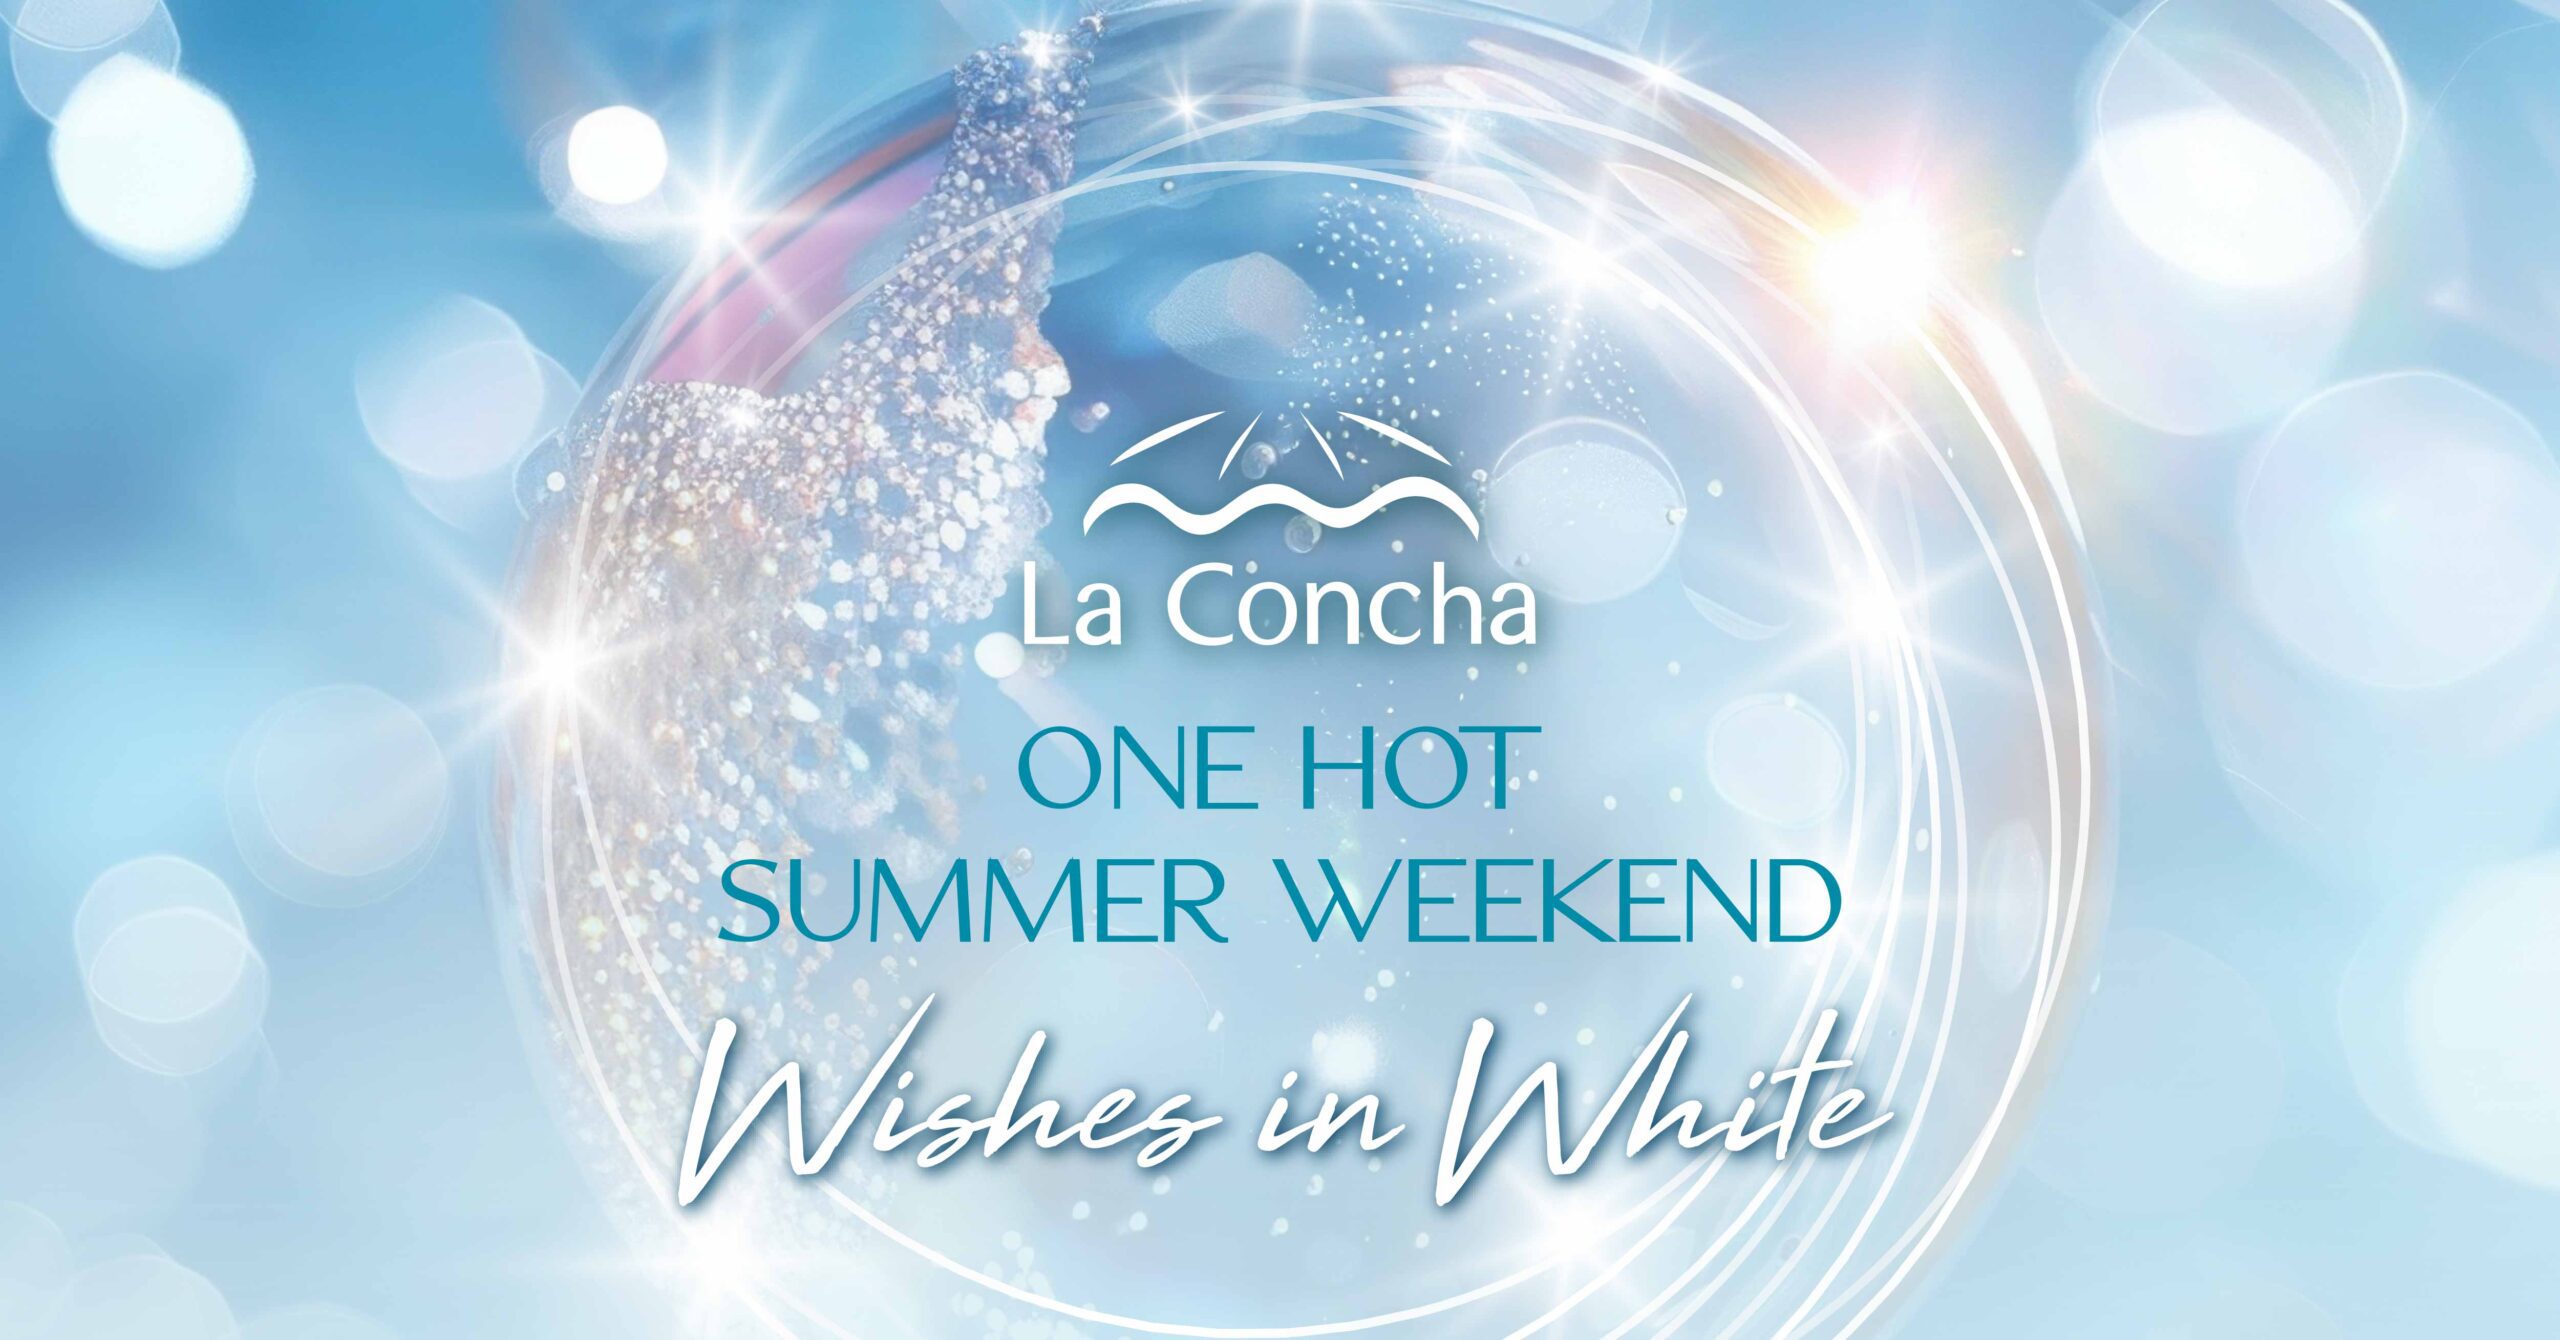 one hot summer weekend promo with bubbles and reads: save the date wishes in white june 21 - 23 party for noche de san juan